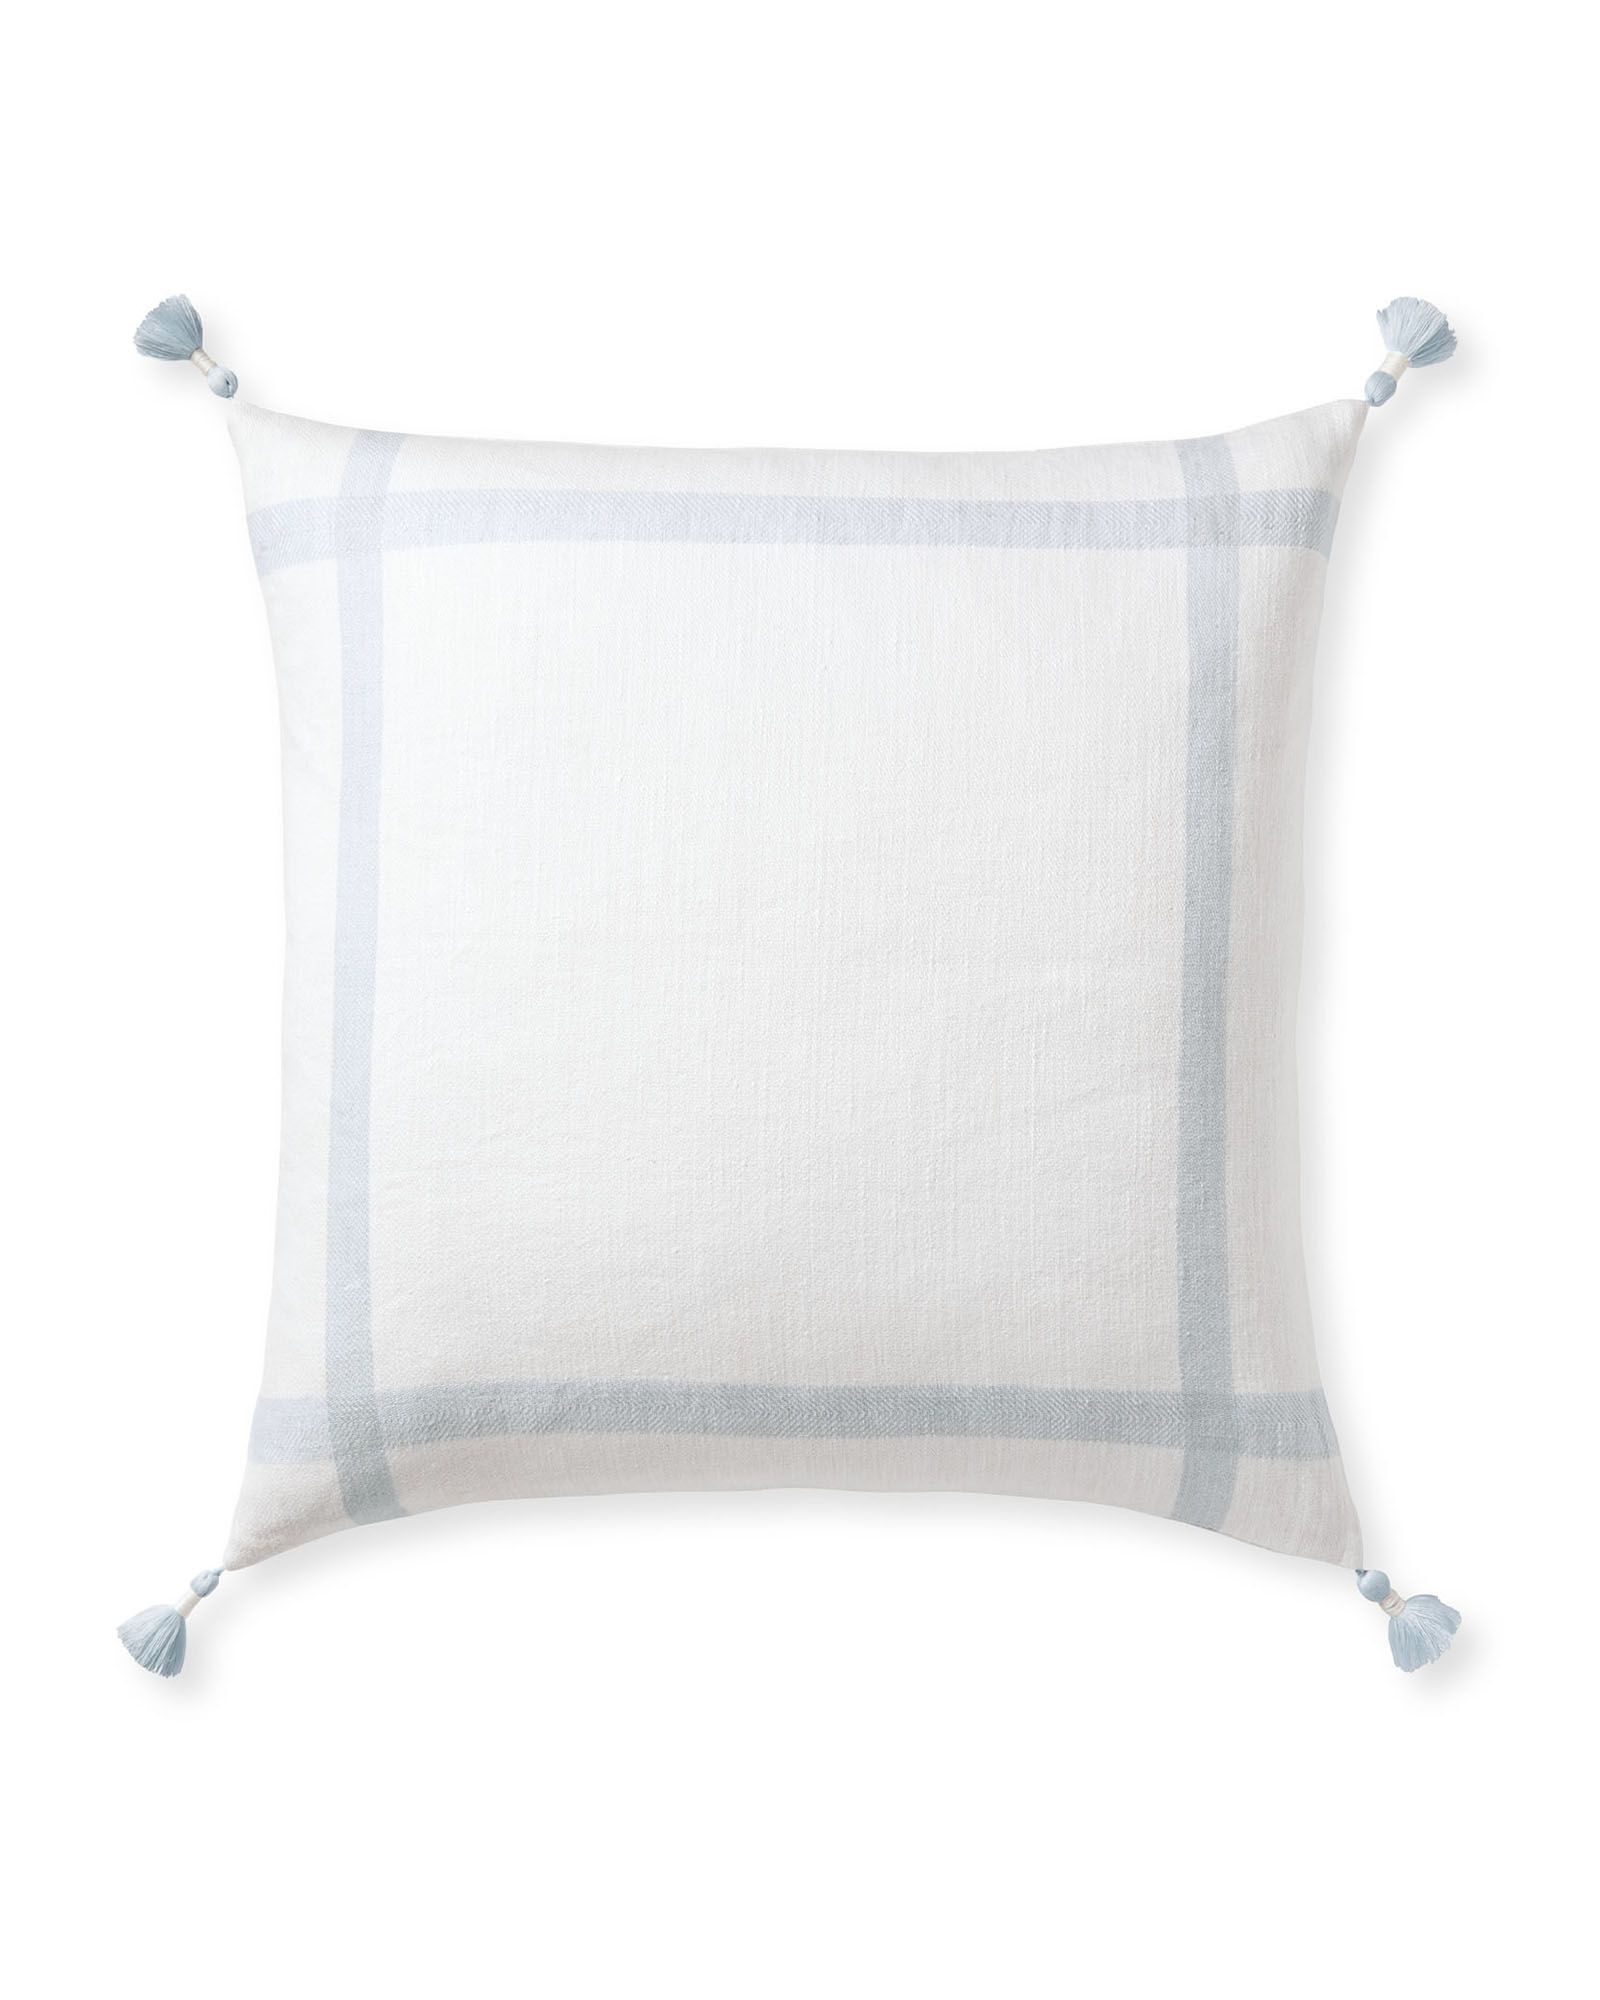 Heath Pillow Cover | Serena and Lily